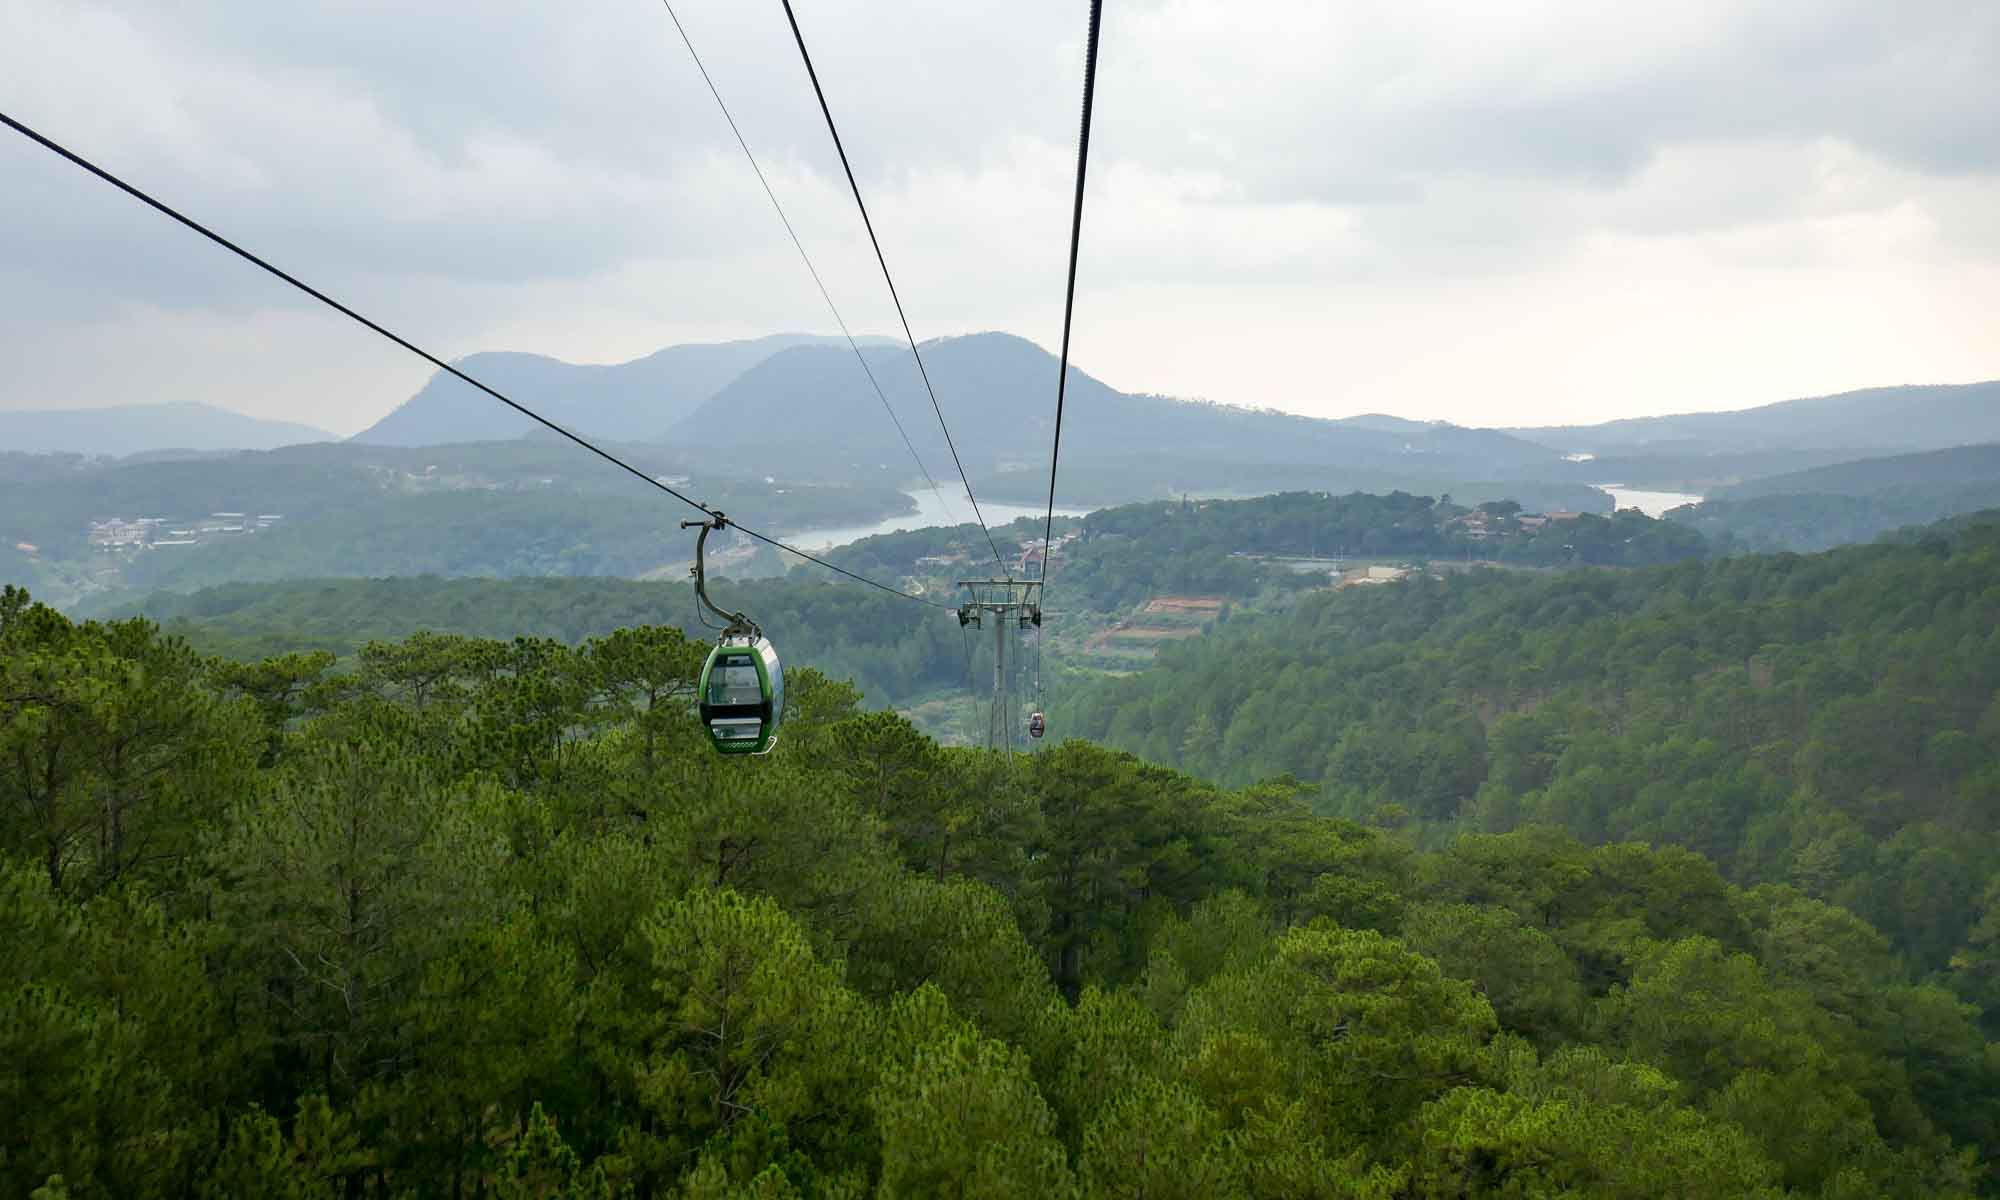 View from the cable car on Tuyen Lam Lake